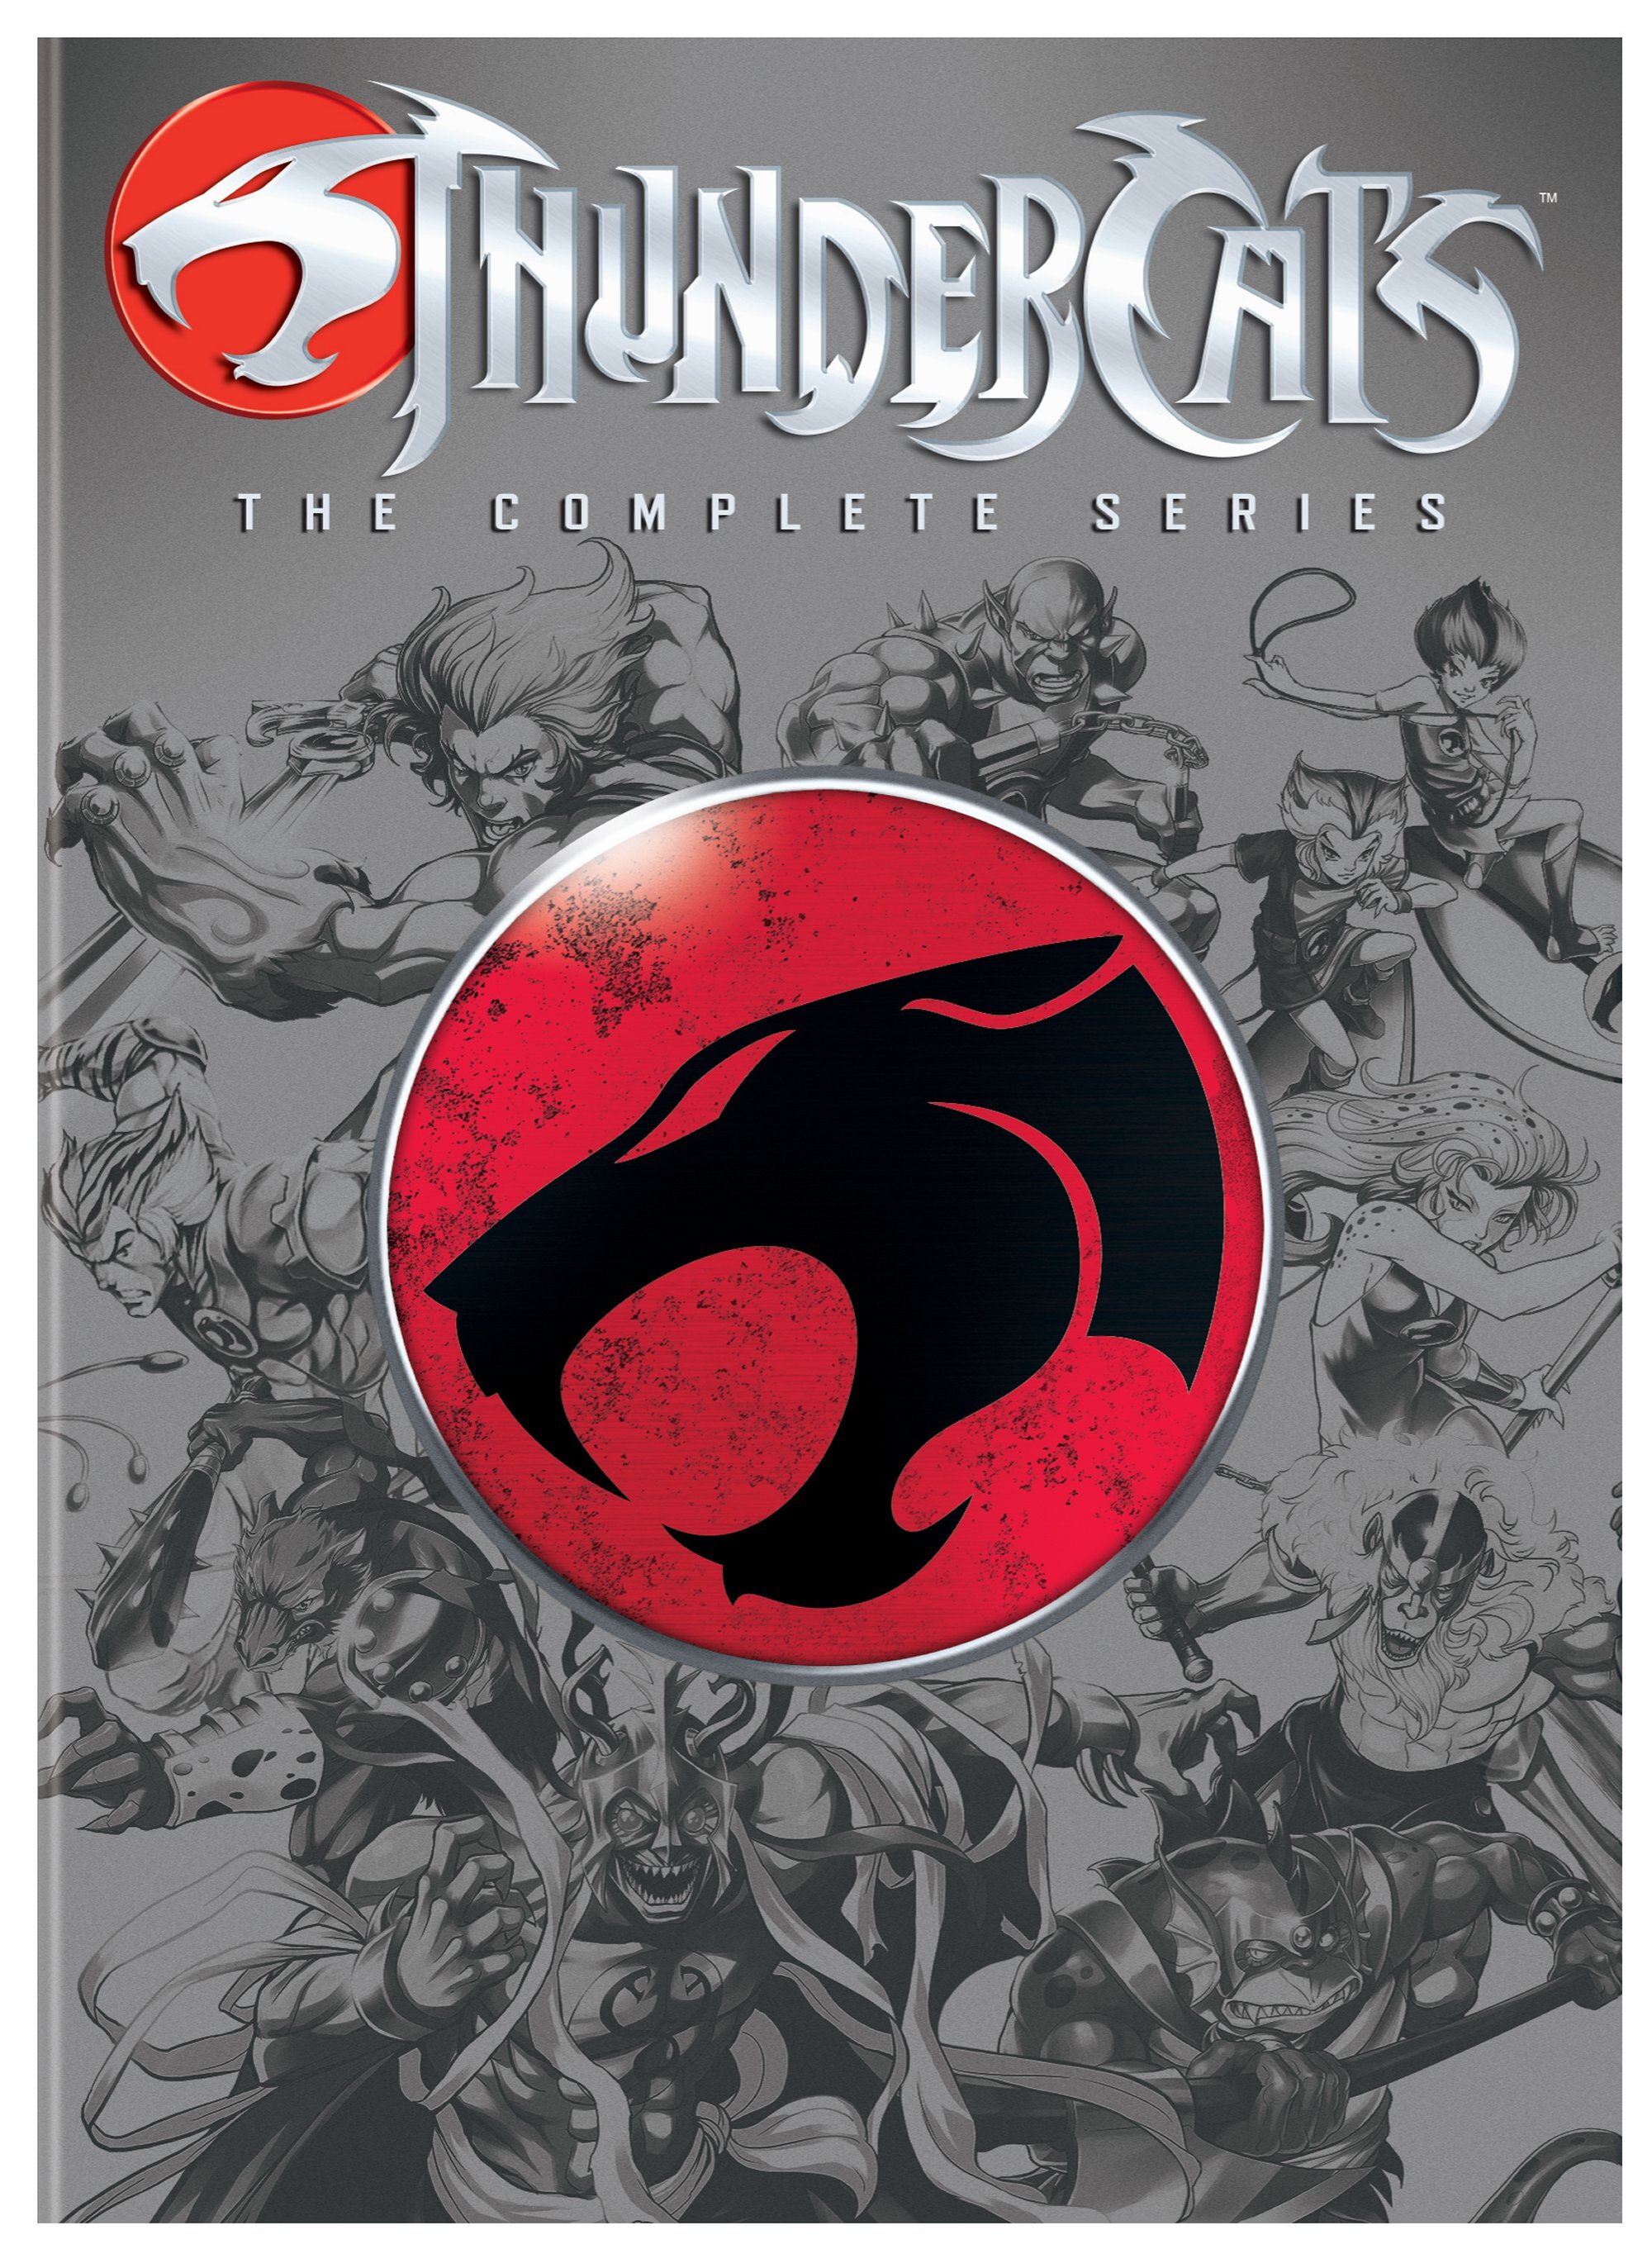 Thundercats: The Complete Collection (Box Set) - DVD [ 1986 ]  - Children Movies On DVD - Movies On GRUV